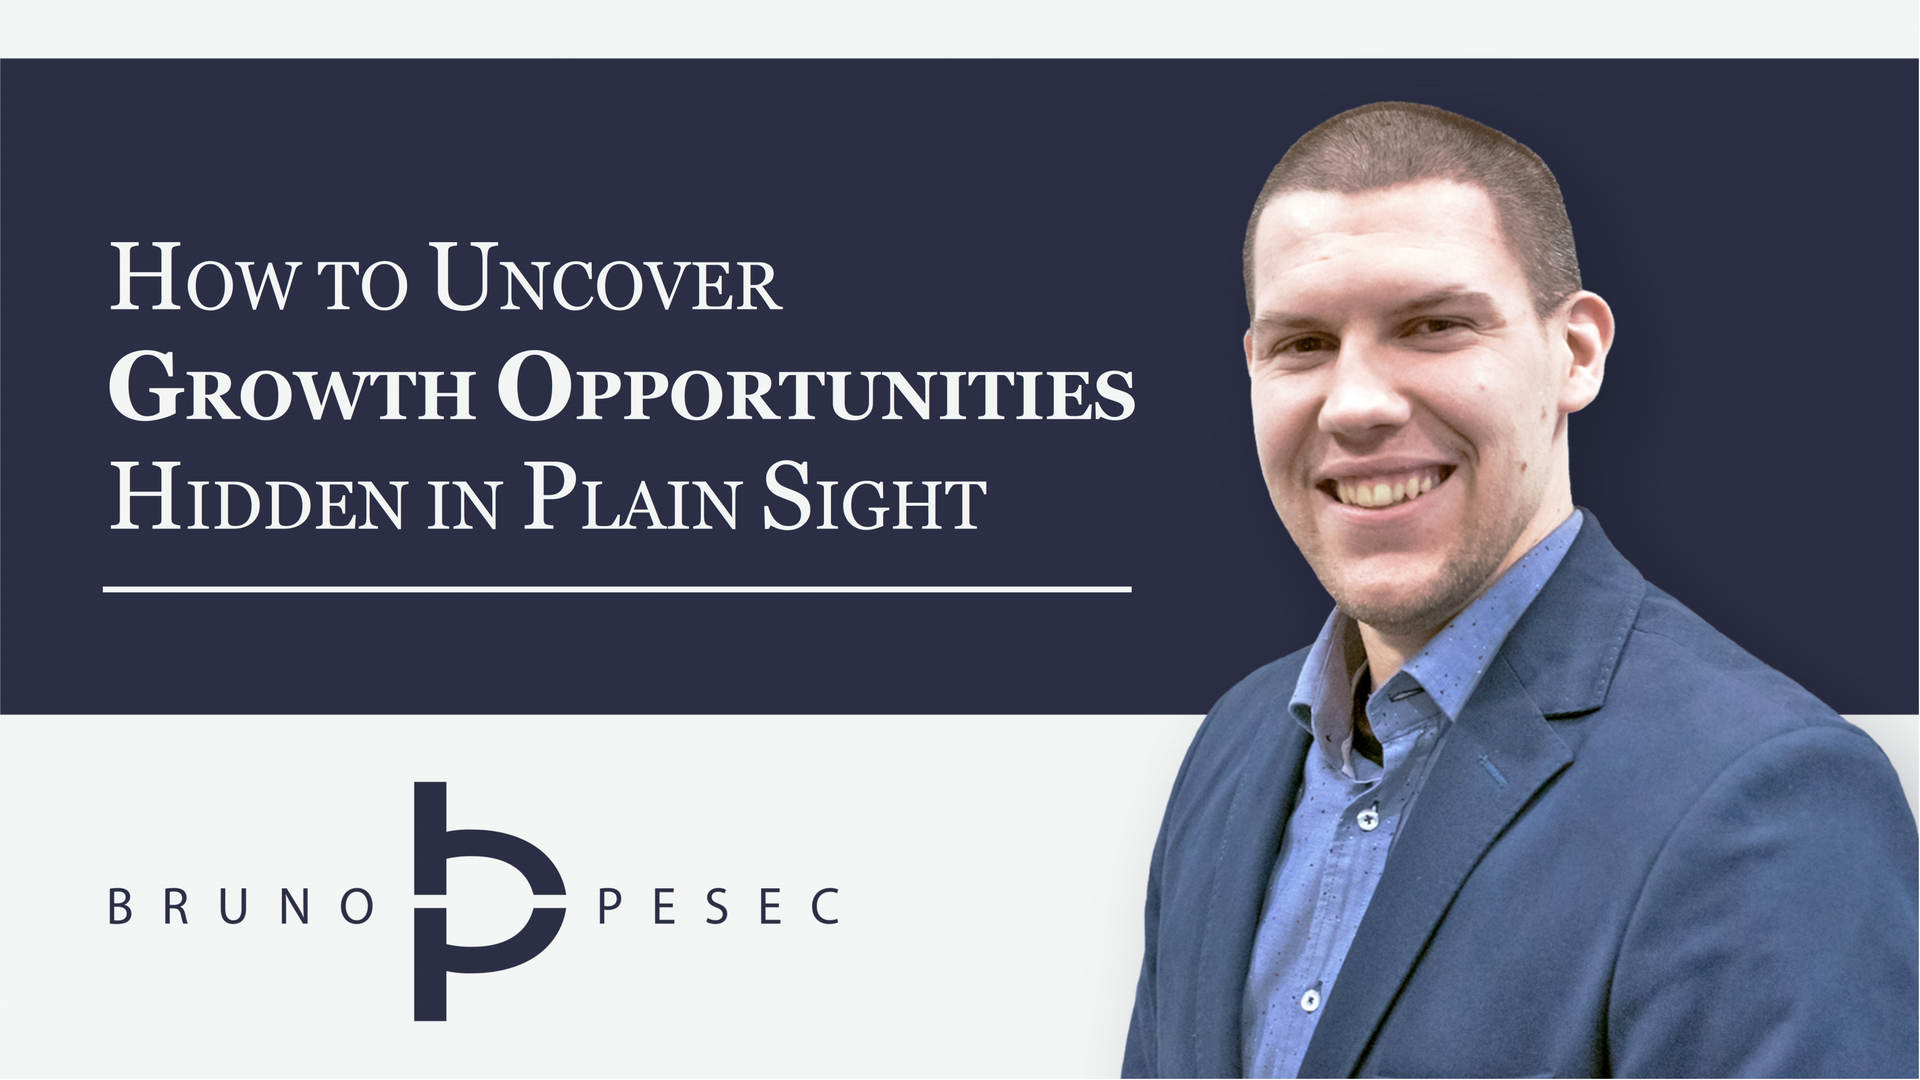 Corporate innovation webinar series by Bruno Pešec: How to uncover growth opportunities hidden in plain sight.